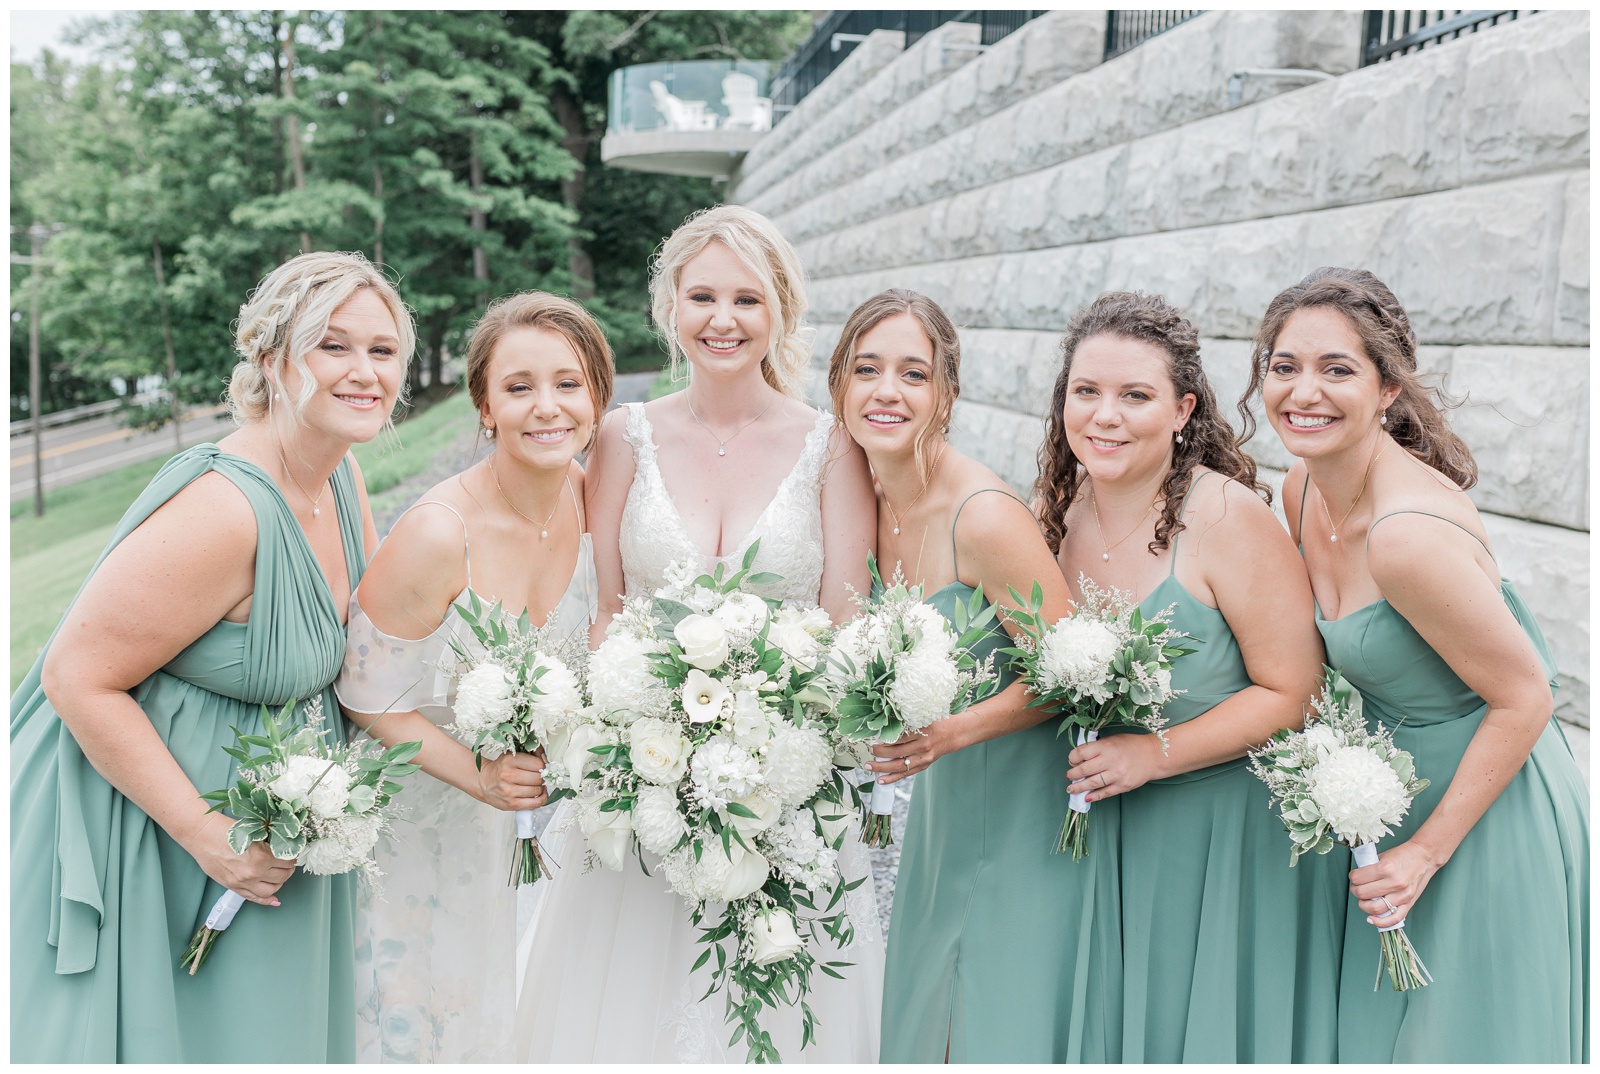 Bridal party of bride and bridemaids at the Inn at Taughannock.